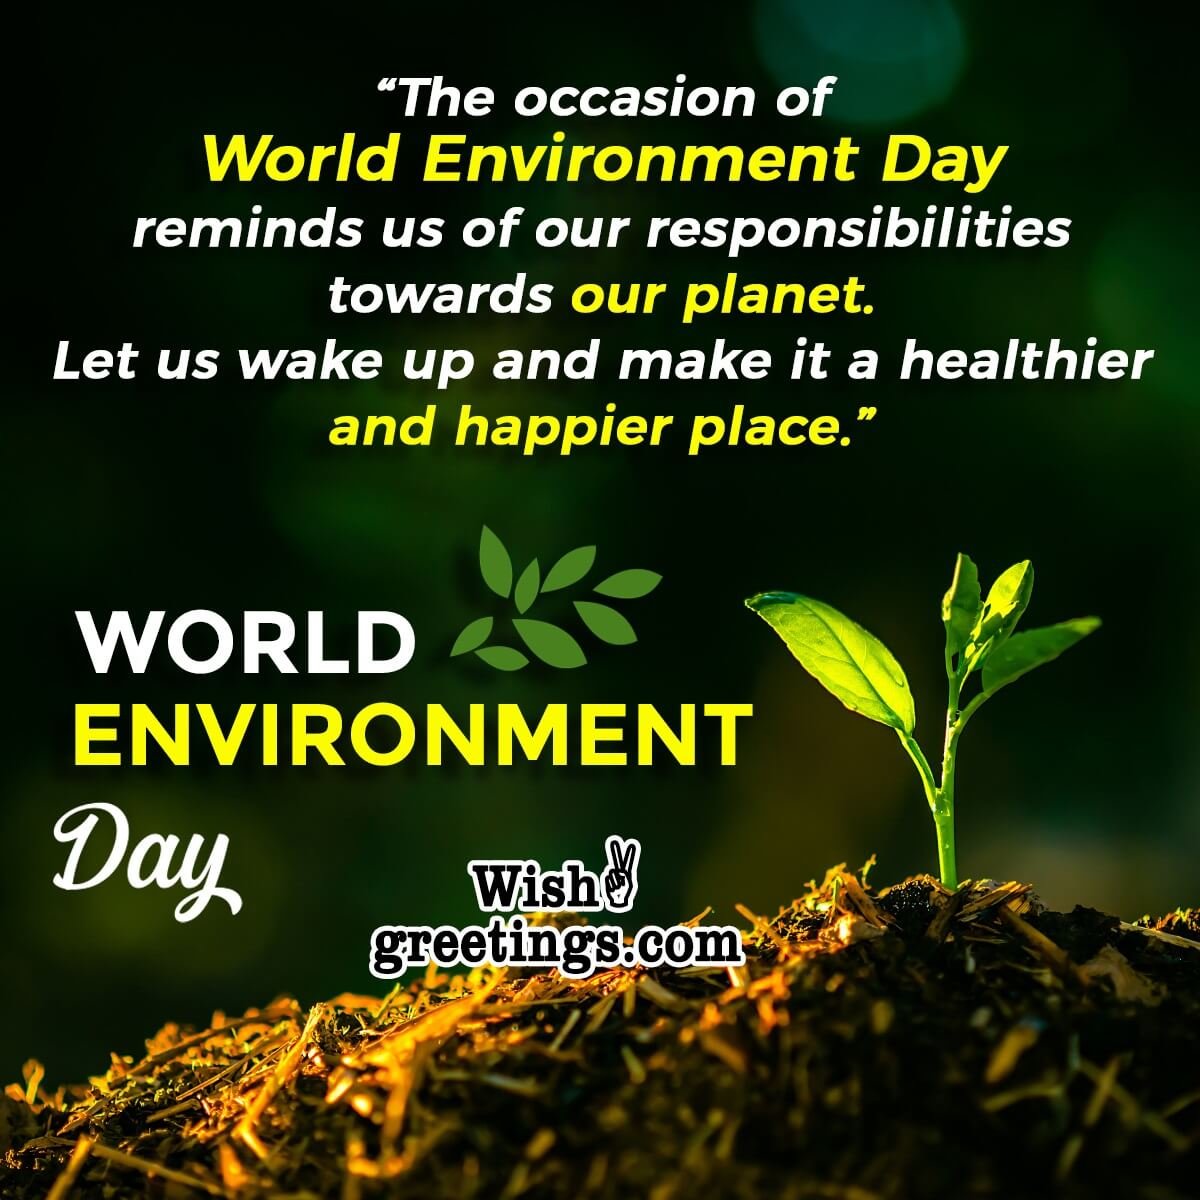 World Environment Day Wishes, Messages And Quotes - Wish Greetings